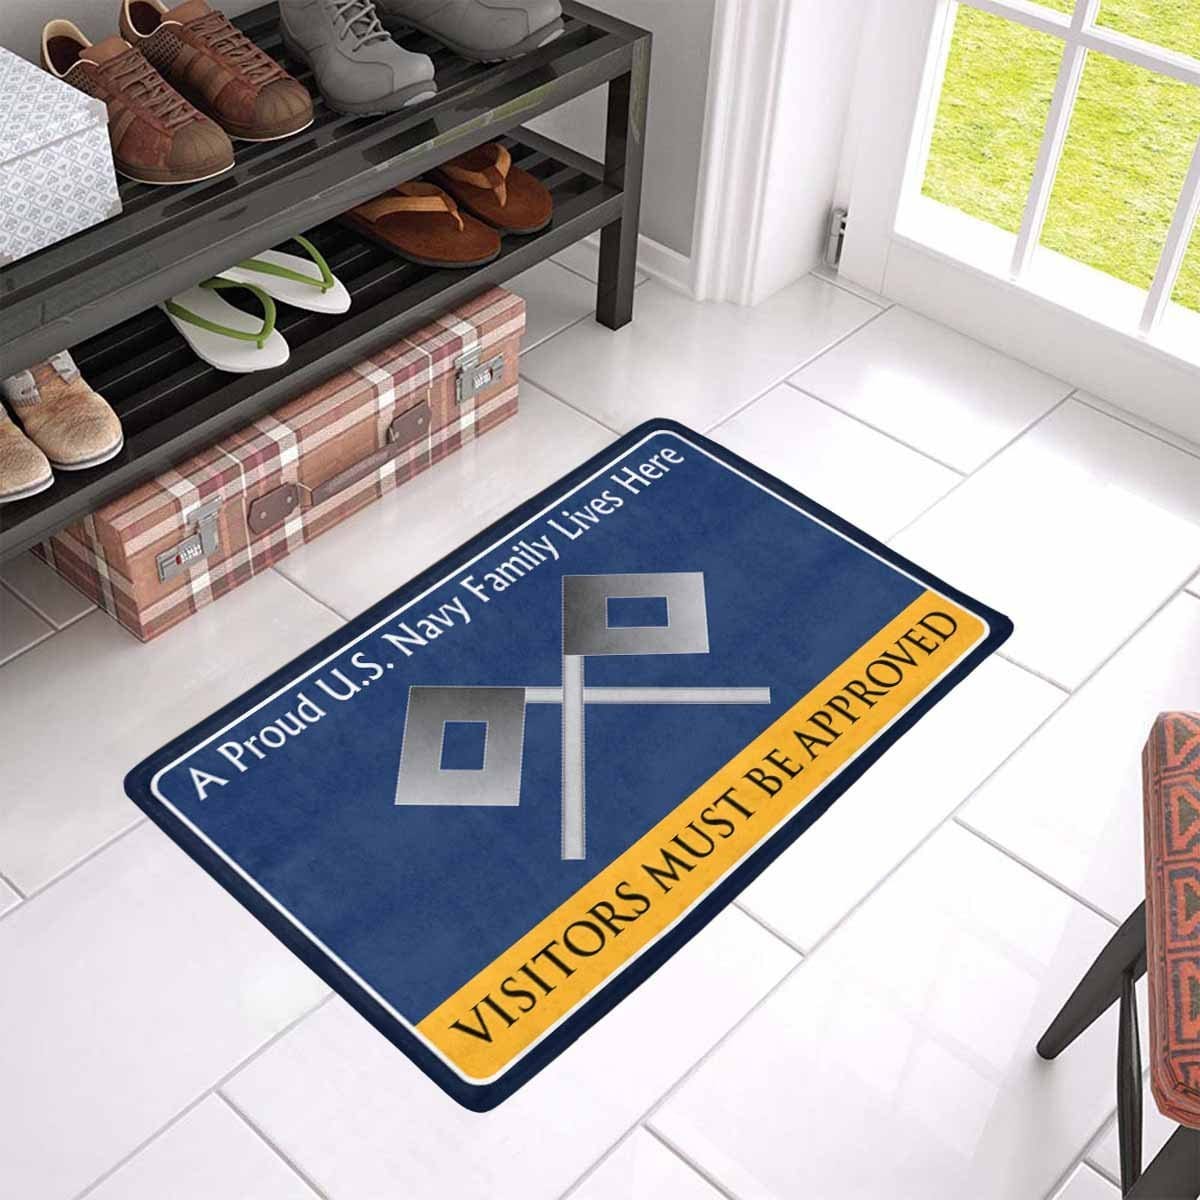 U.S Navy Signalman Navy SN Family Doormat - Visitors must be approved (23,6 inches x 15,7 inches)-Doormat-Navy-Rate-Veterans Nation